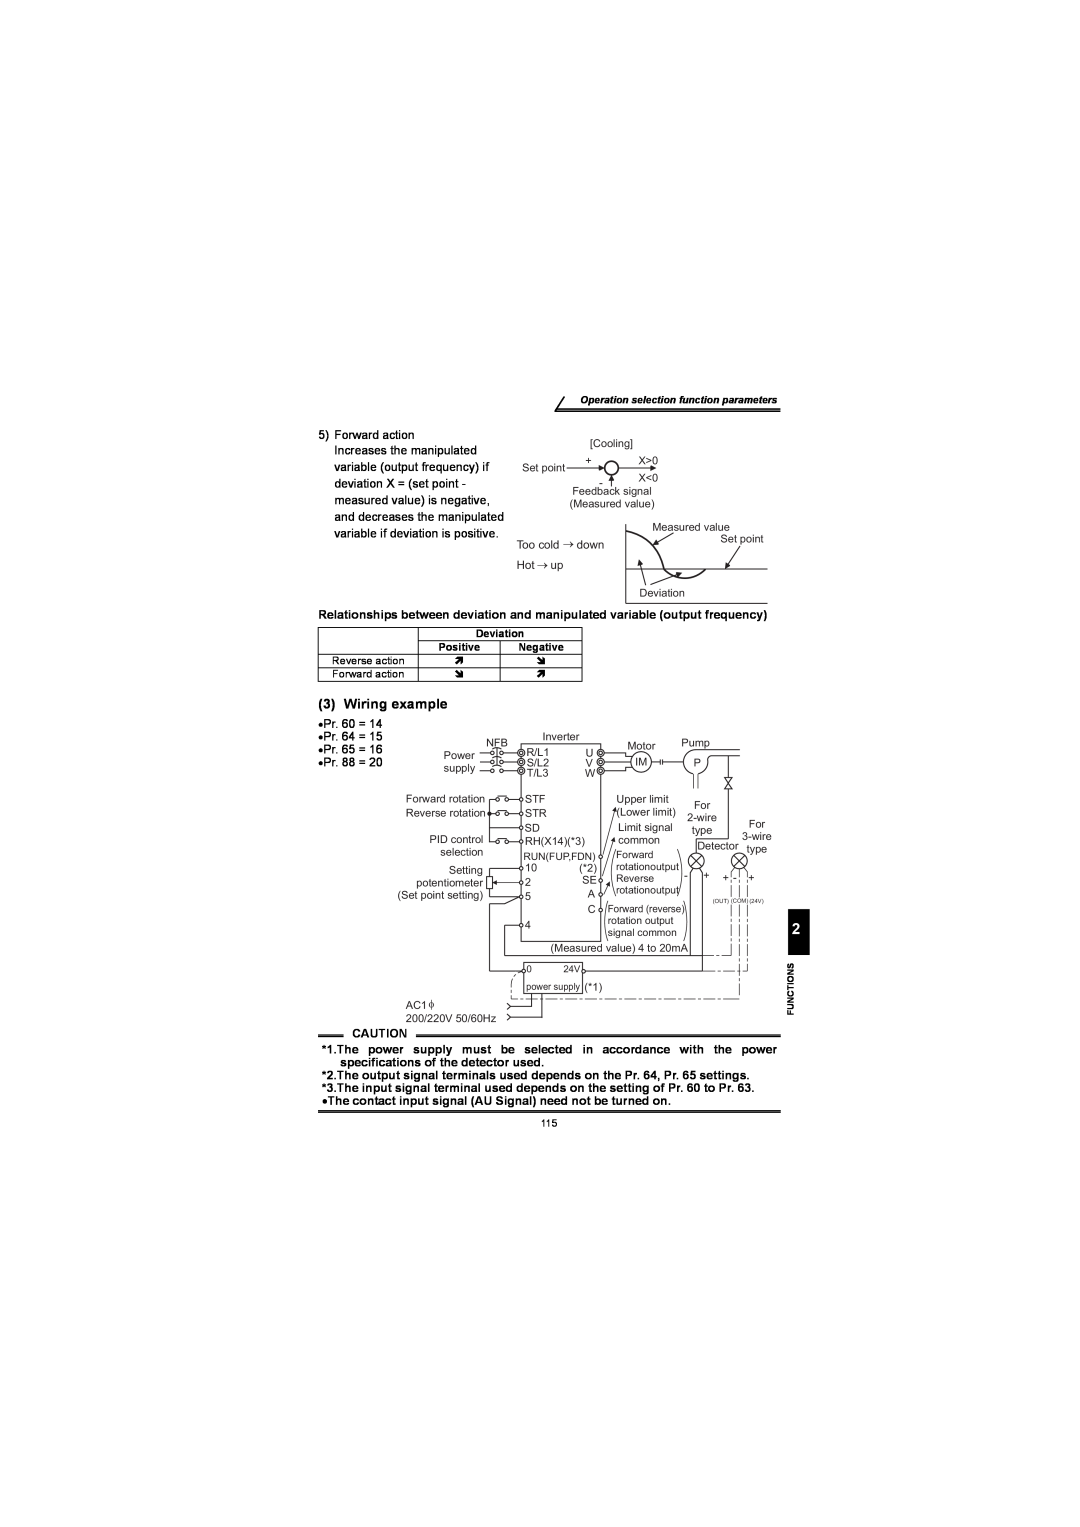 Mitsubishi Electronics FR-S500 instruction manual Wiring example, The contact input signal AU Signal need not be turned on 